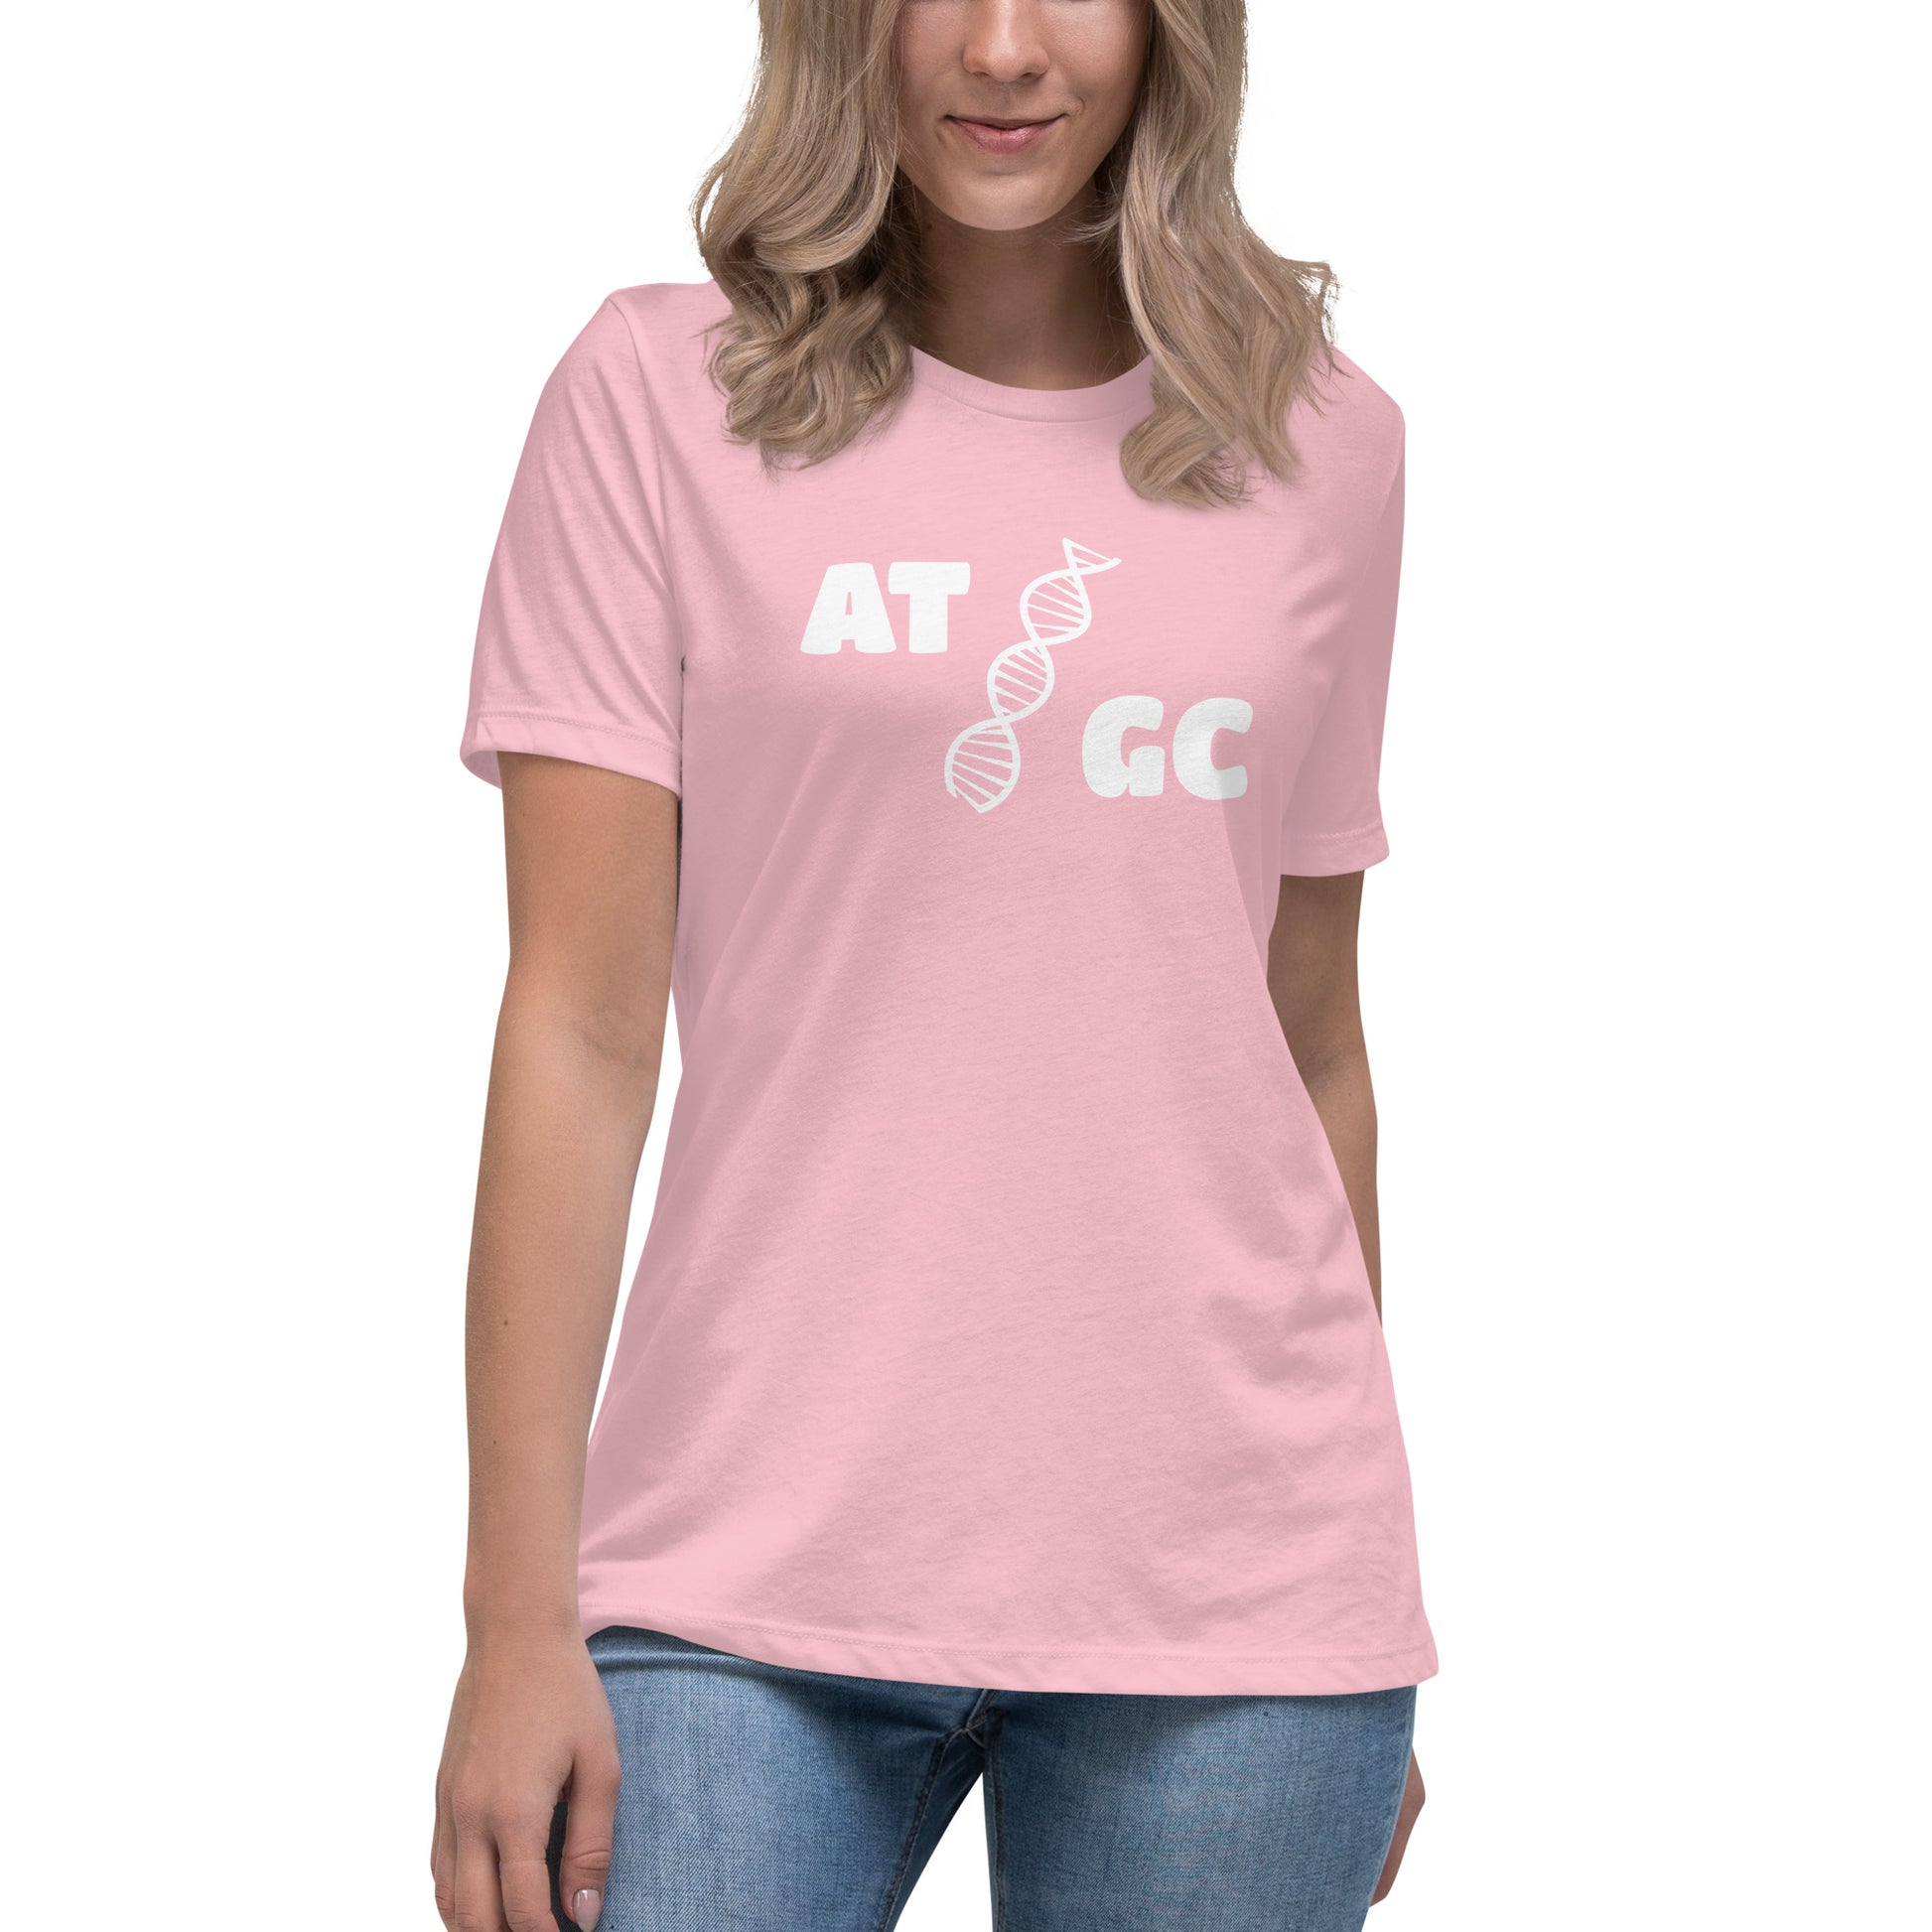 Women with pink t-shirt with image of a DNA string and the text "ATGC"